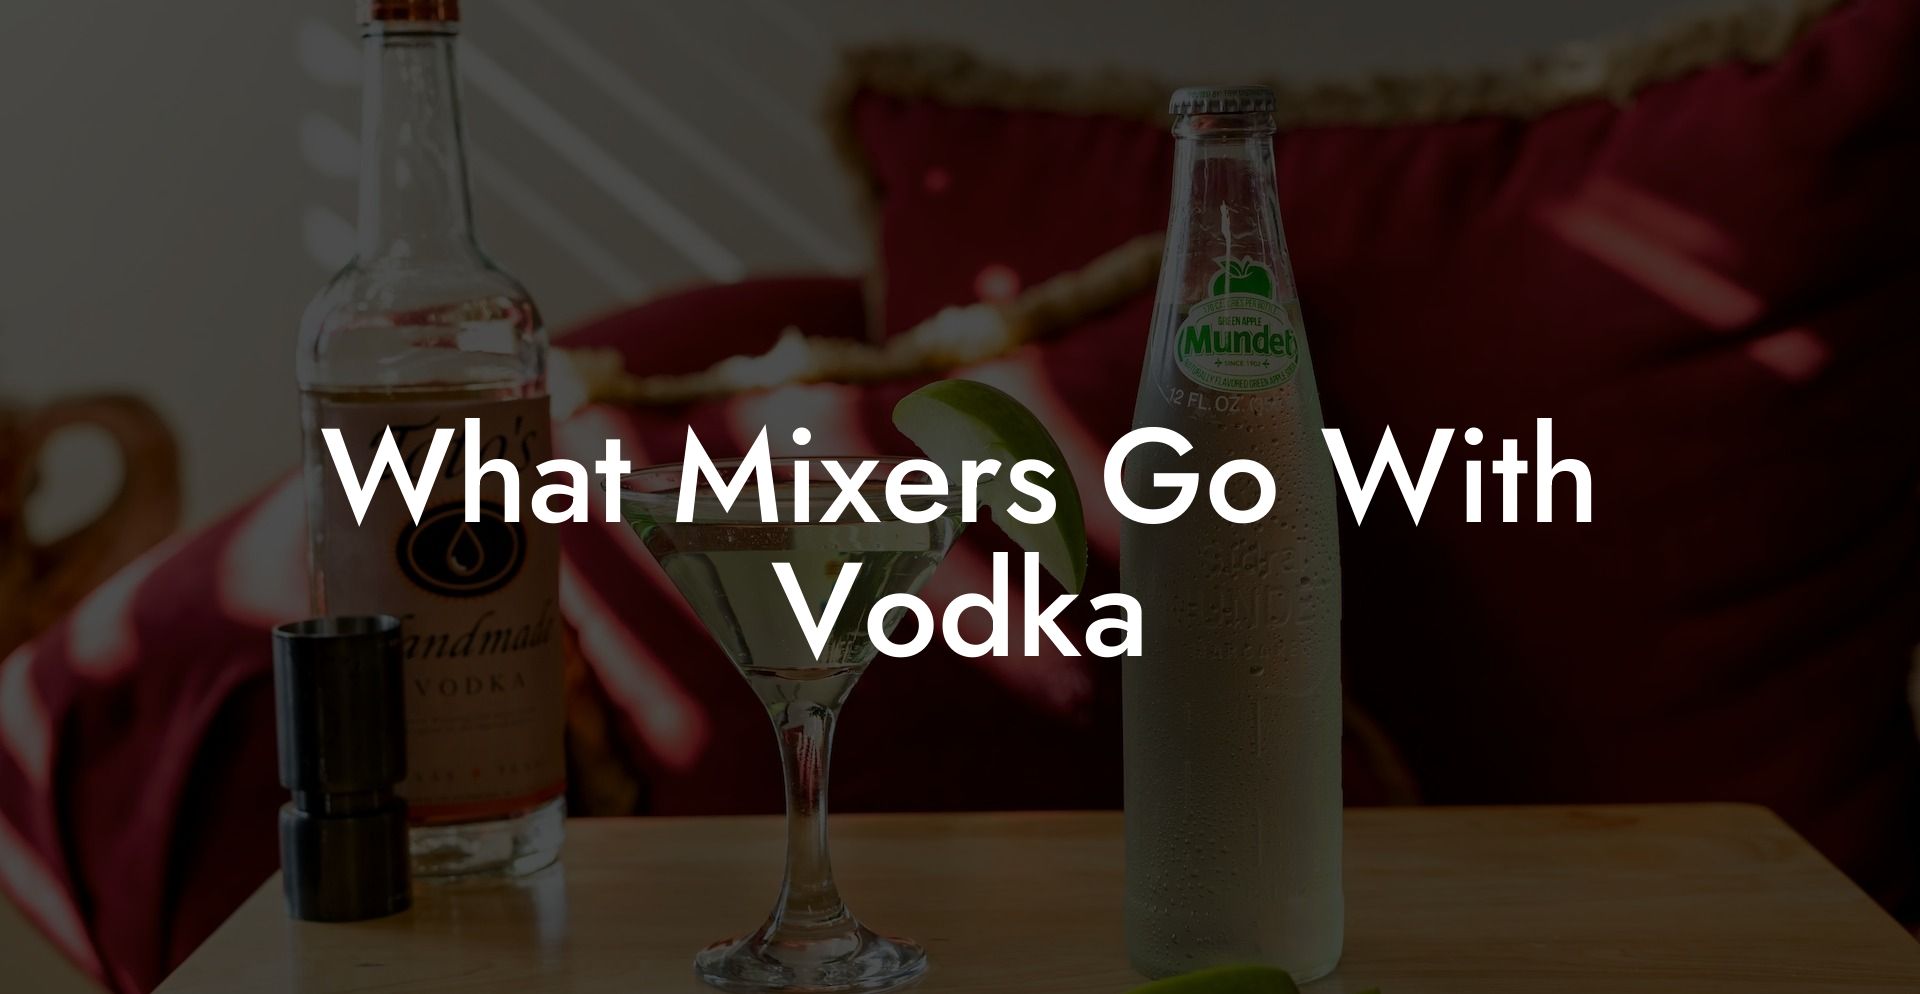 What Mixers Go With Vodka